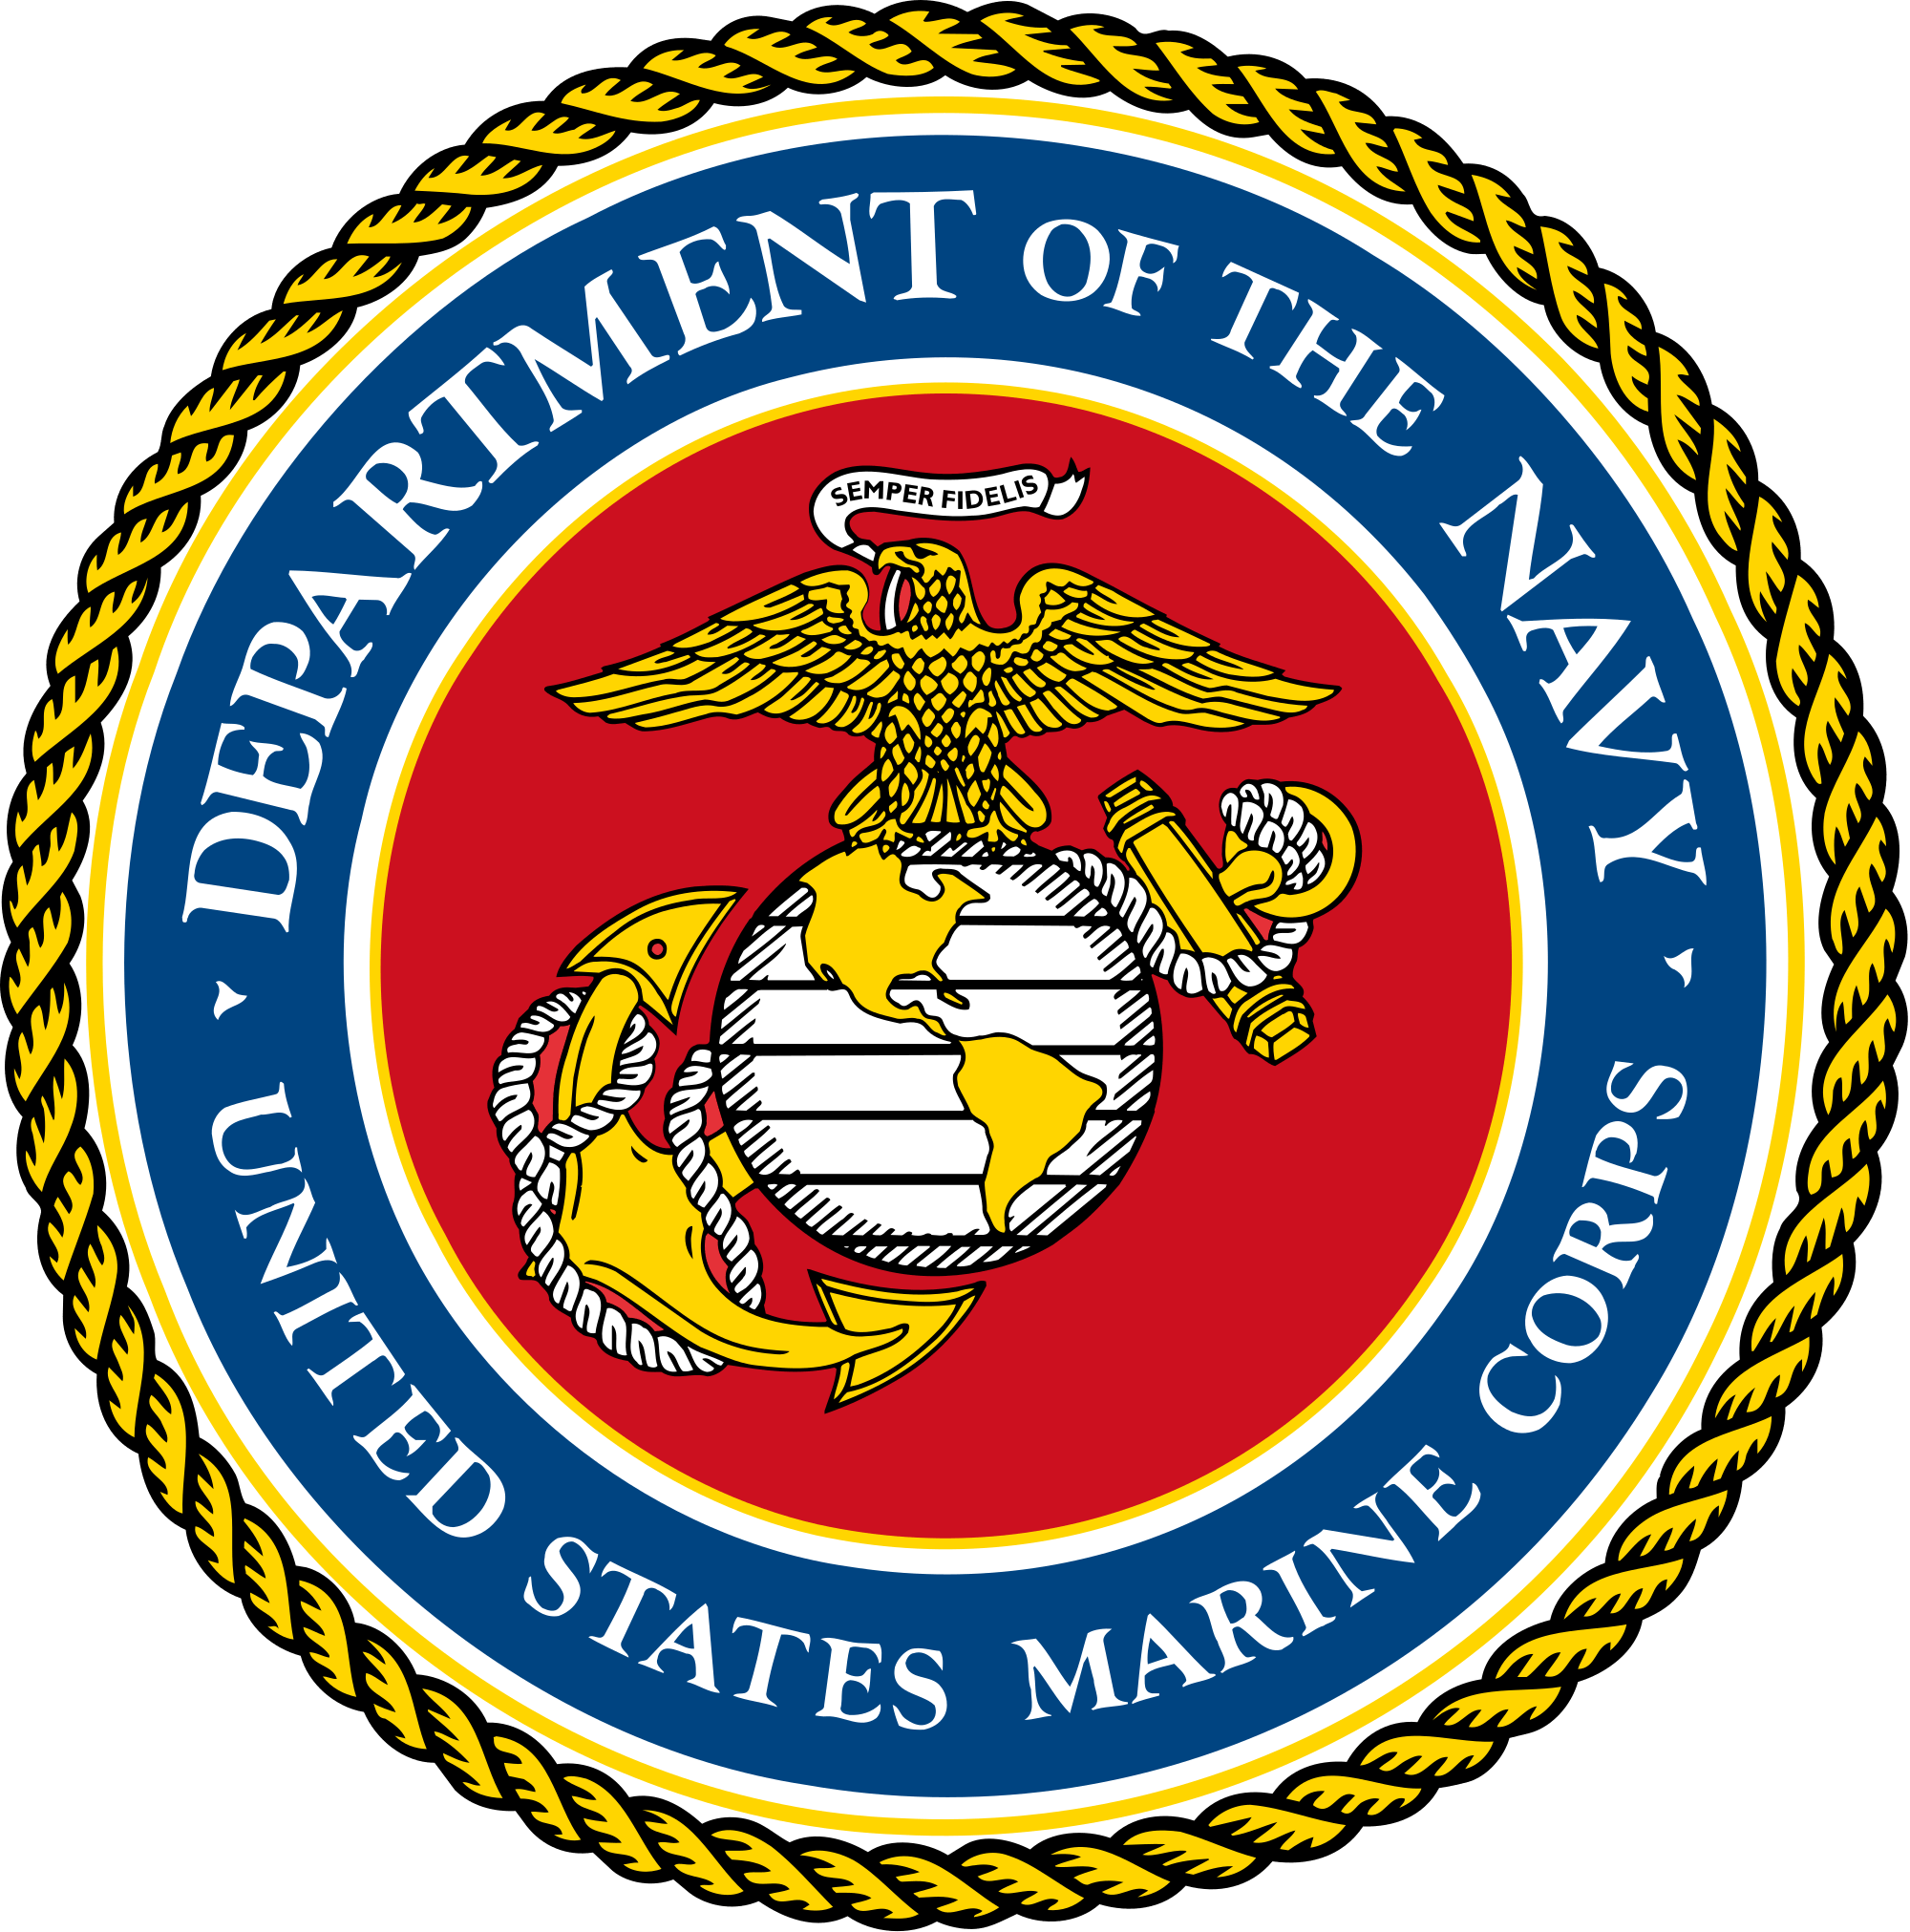 Marine Corps Logo - File:Seal of the United States Marine Corps.svg - Wikimedia Commons